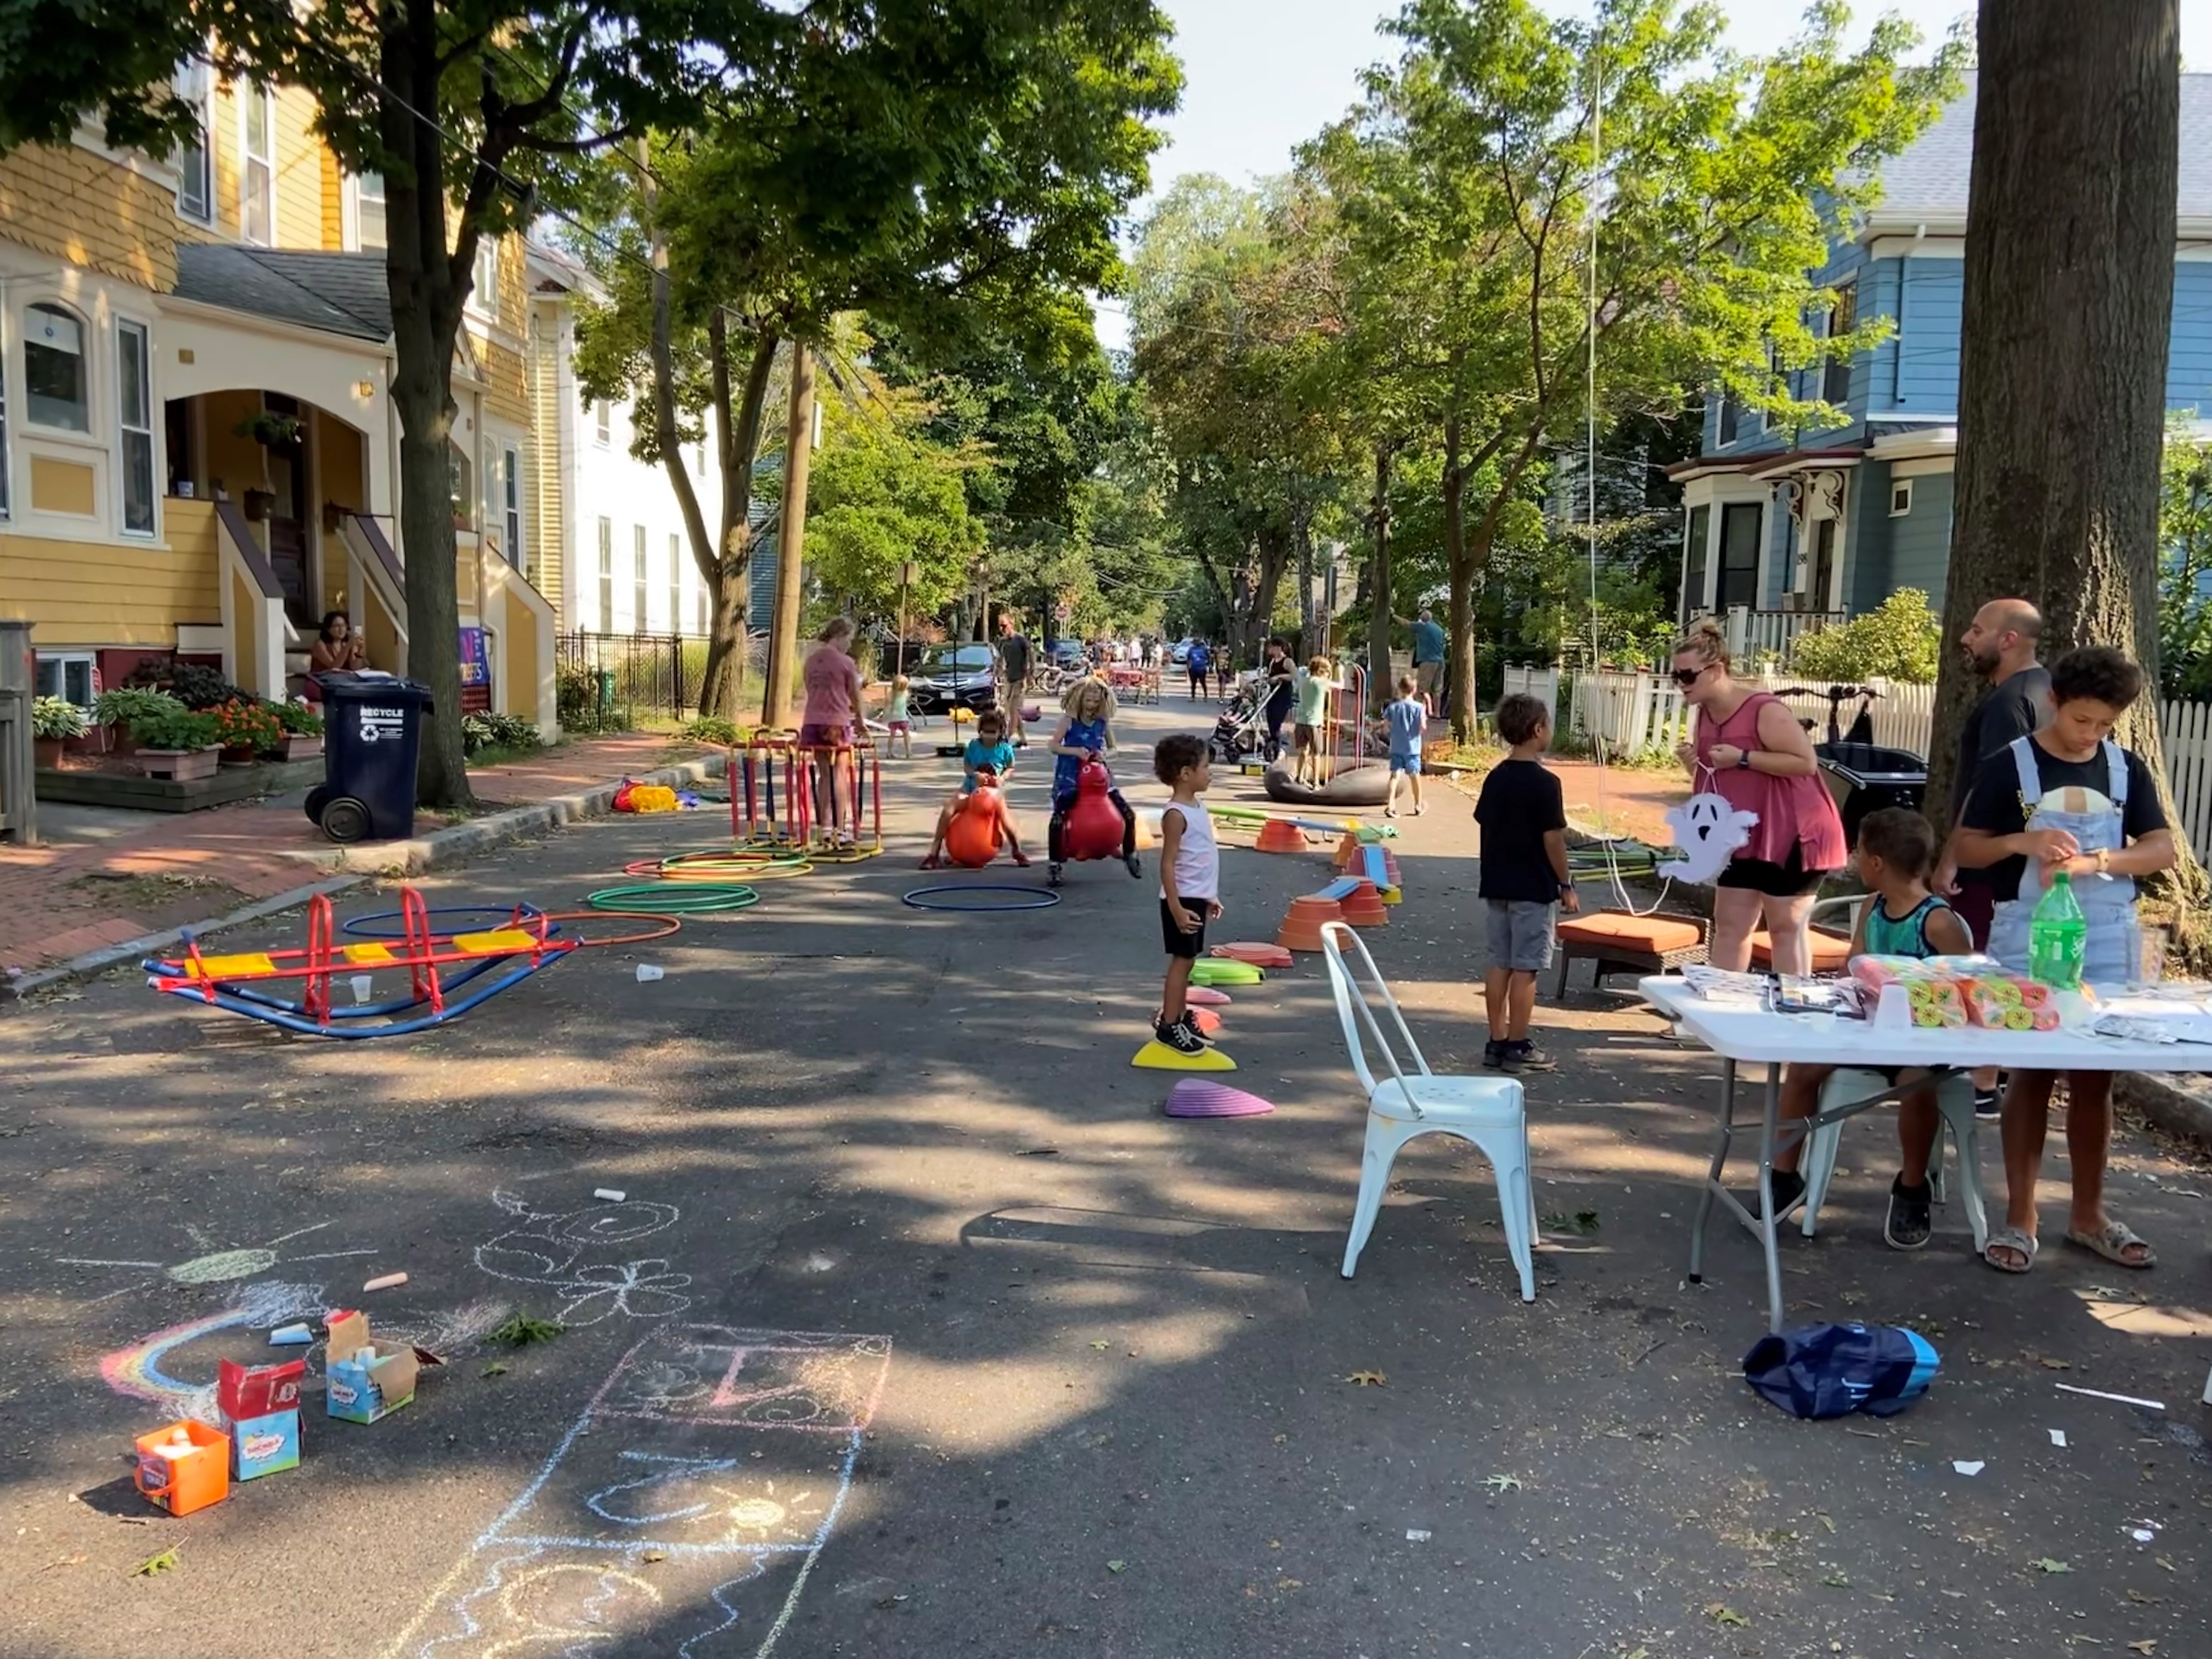 A photo of young people playing on a city street. In the foreground one young person is playing with colorful blocks on a folding table.